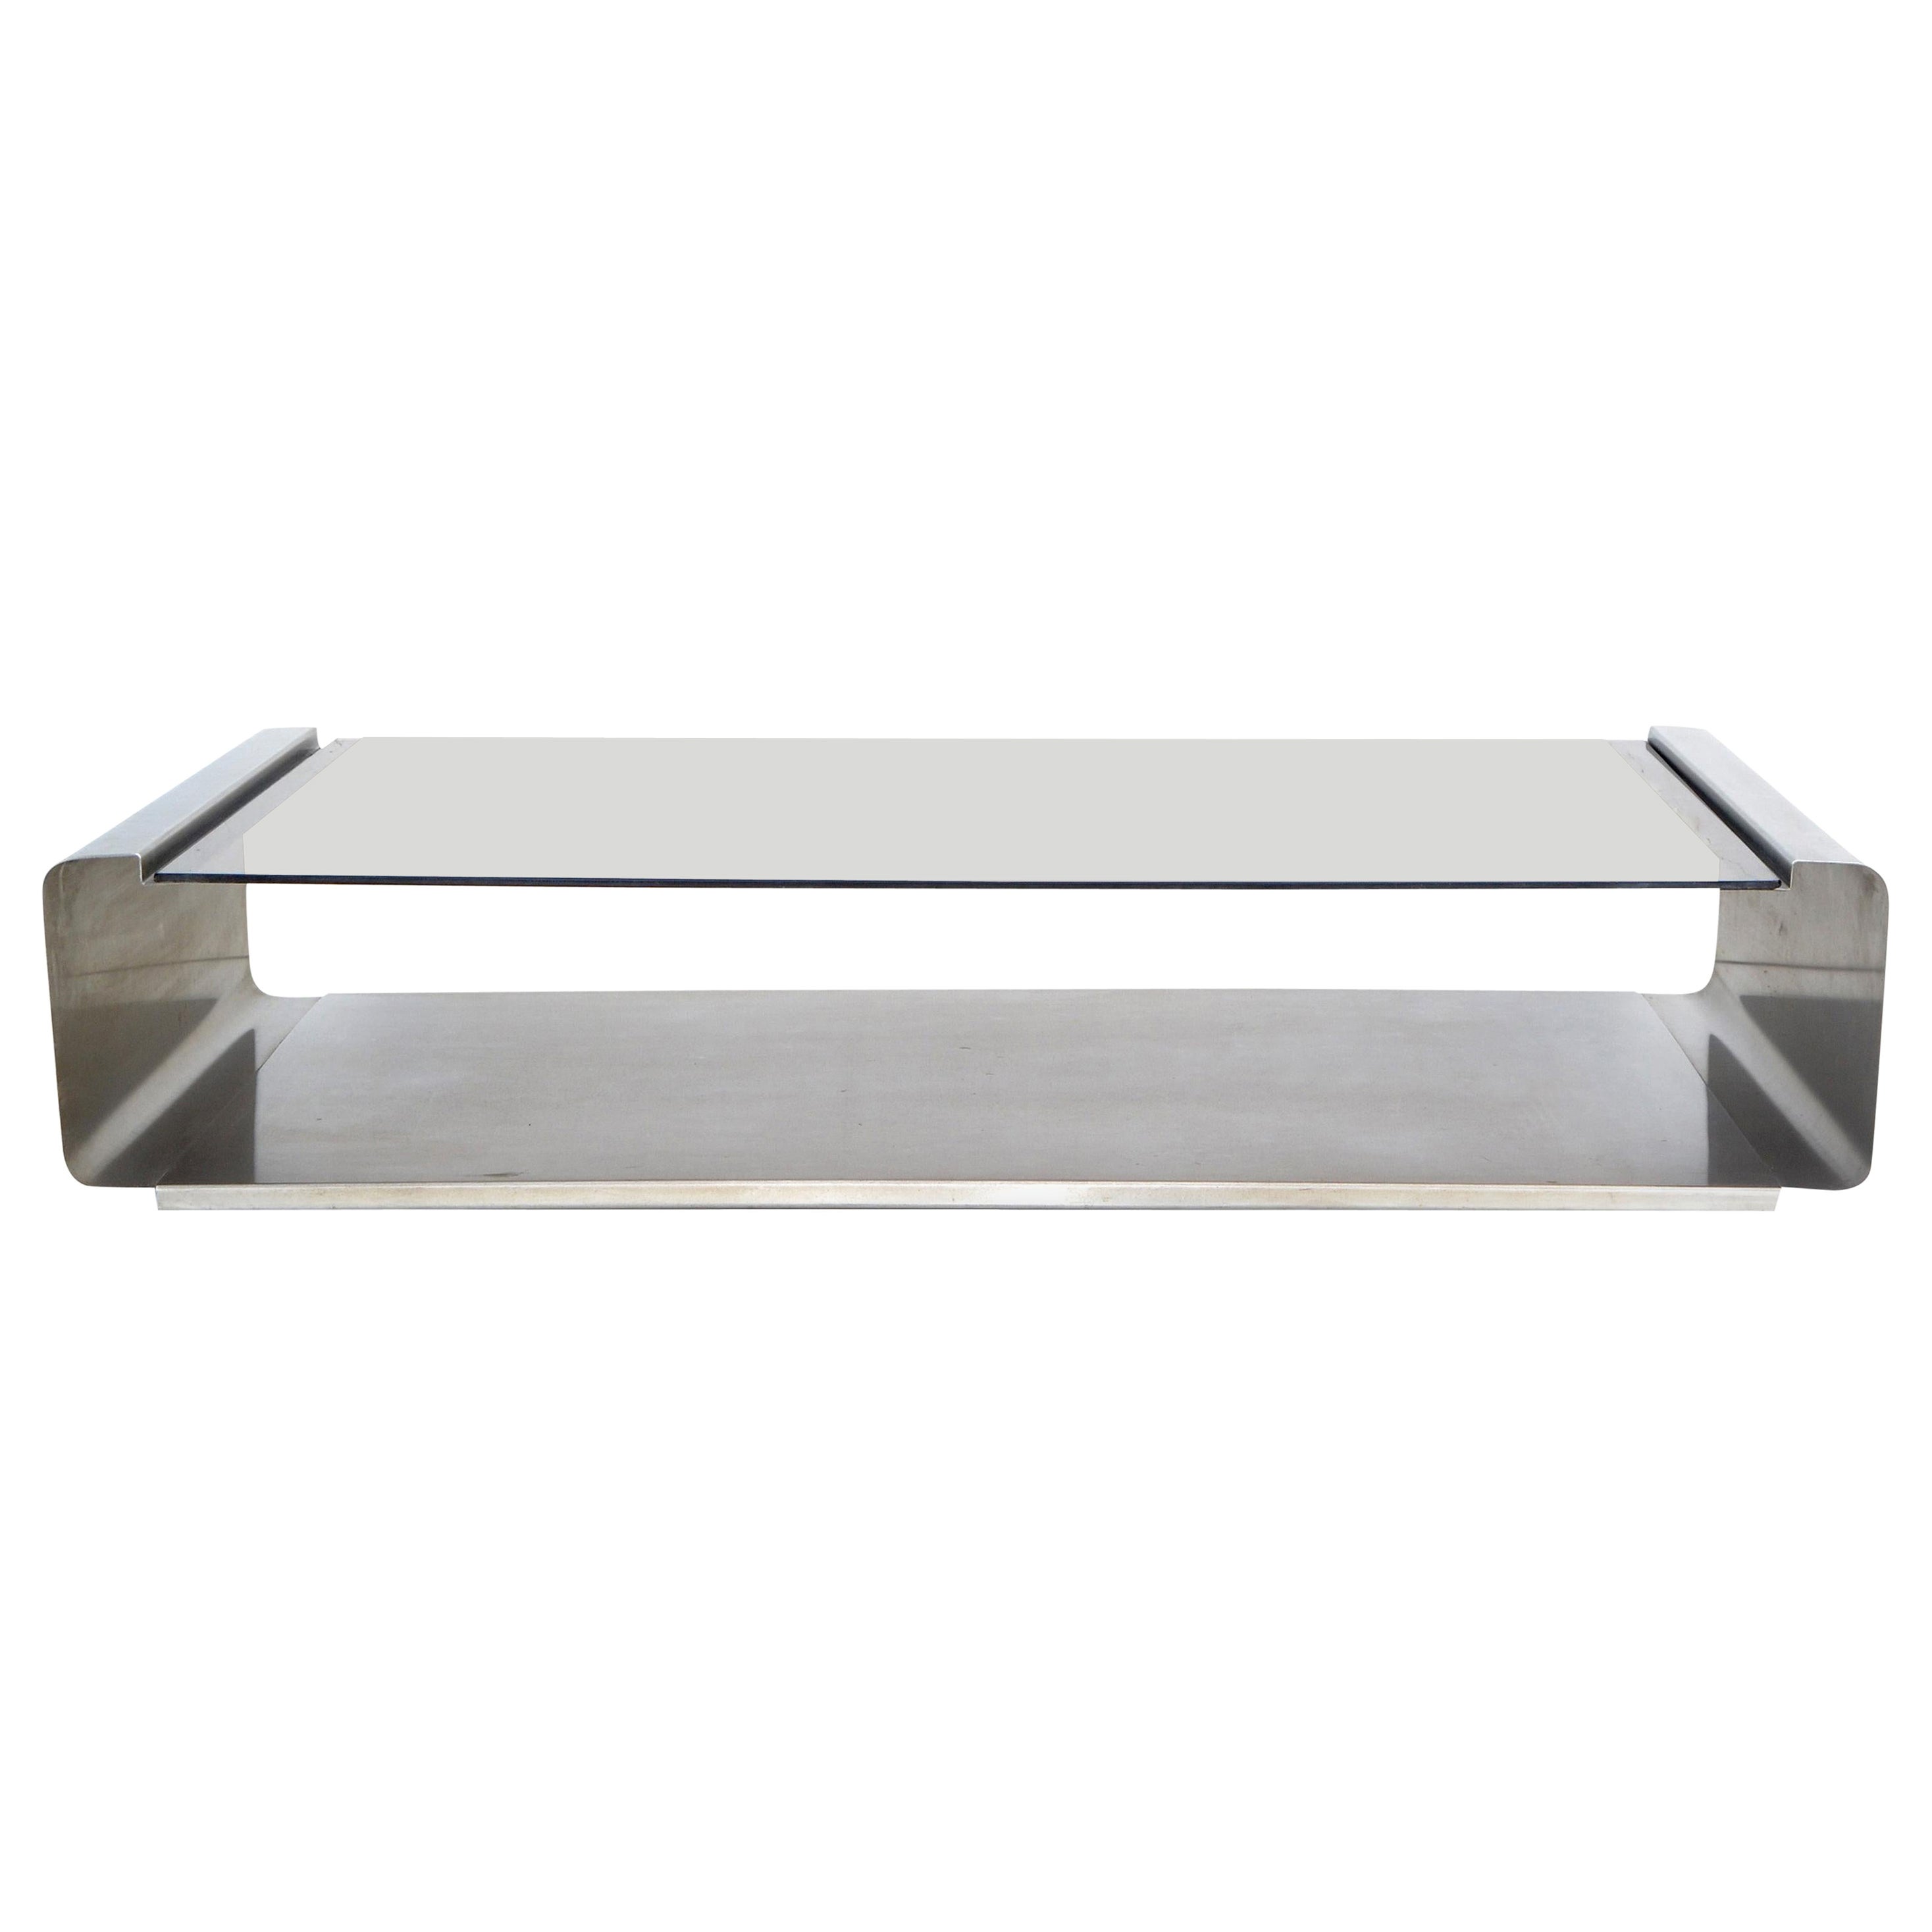 Francois Monnet Mid-Century Modern Coffee Table Smoked Glass and Brushed Steel